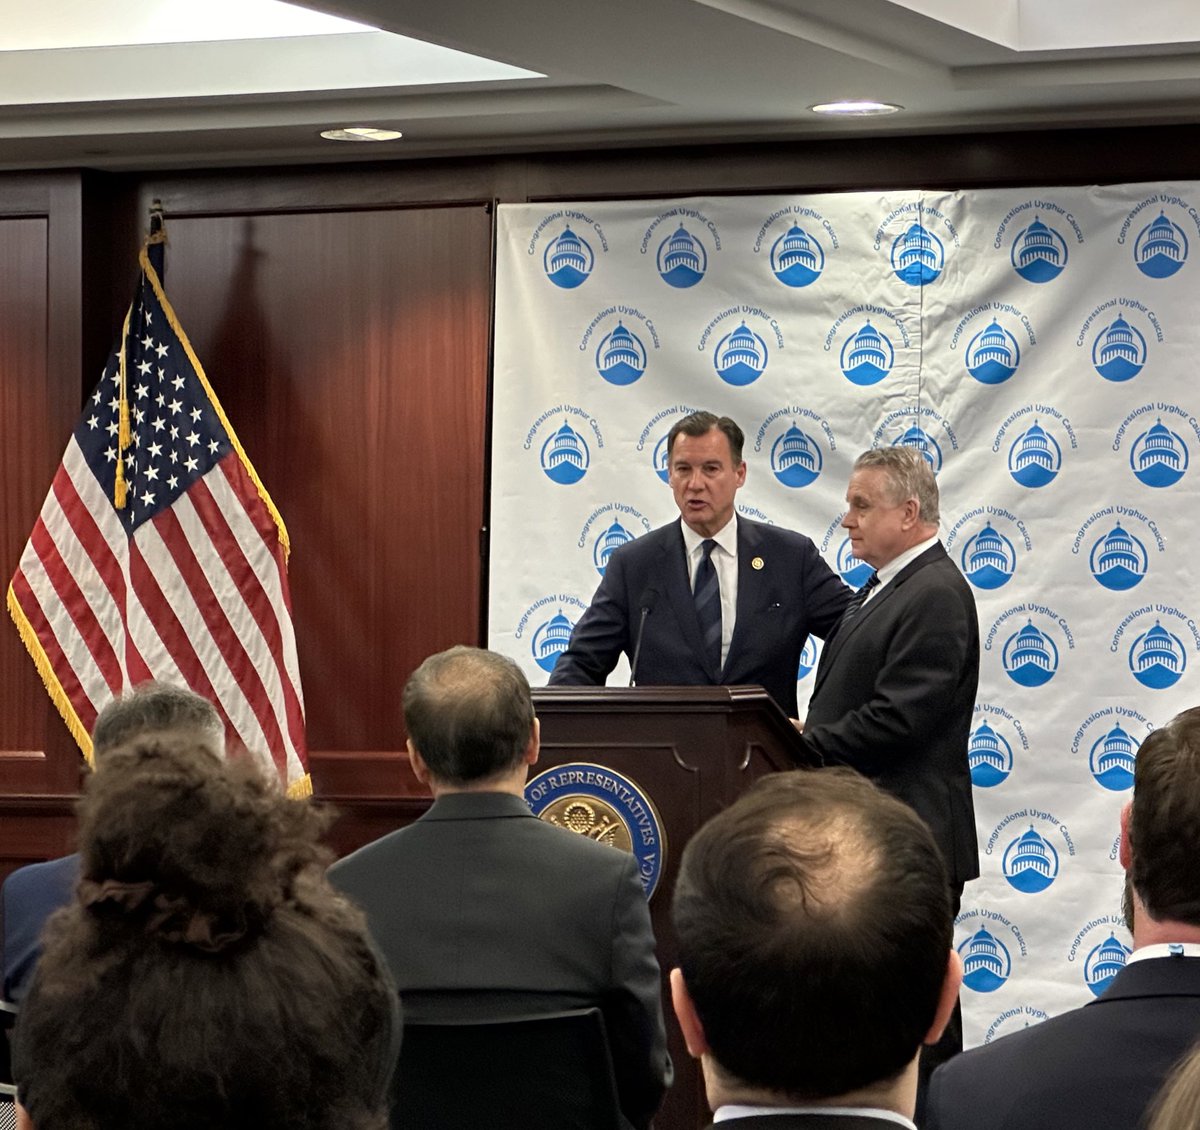 A great honor to be present at the launch of the Congressional Uyghur Caucus under the leadership of Rep. Chris Smith & @RepTomSuozzi. S/o to @CUyghurs @RushanAbbas @Dolkun_Isa for their relentless advocacy. Congress needs to hear the voices of human rights defenders like them.